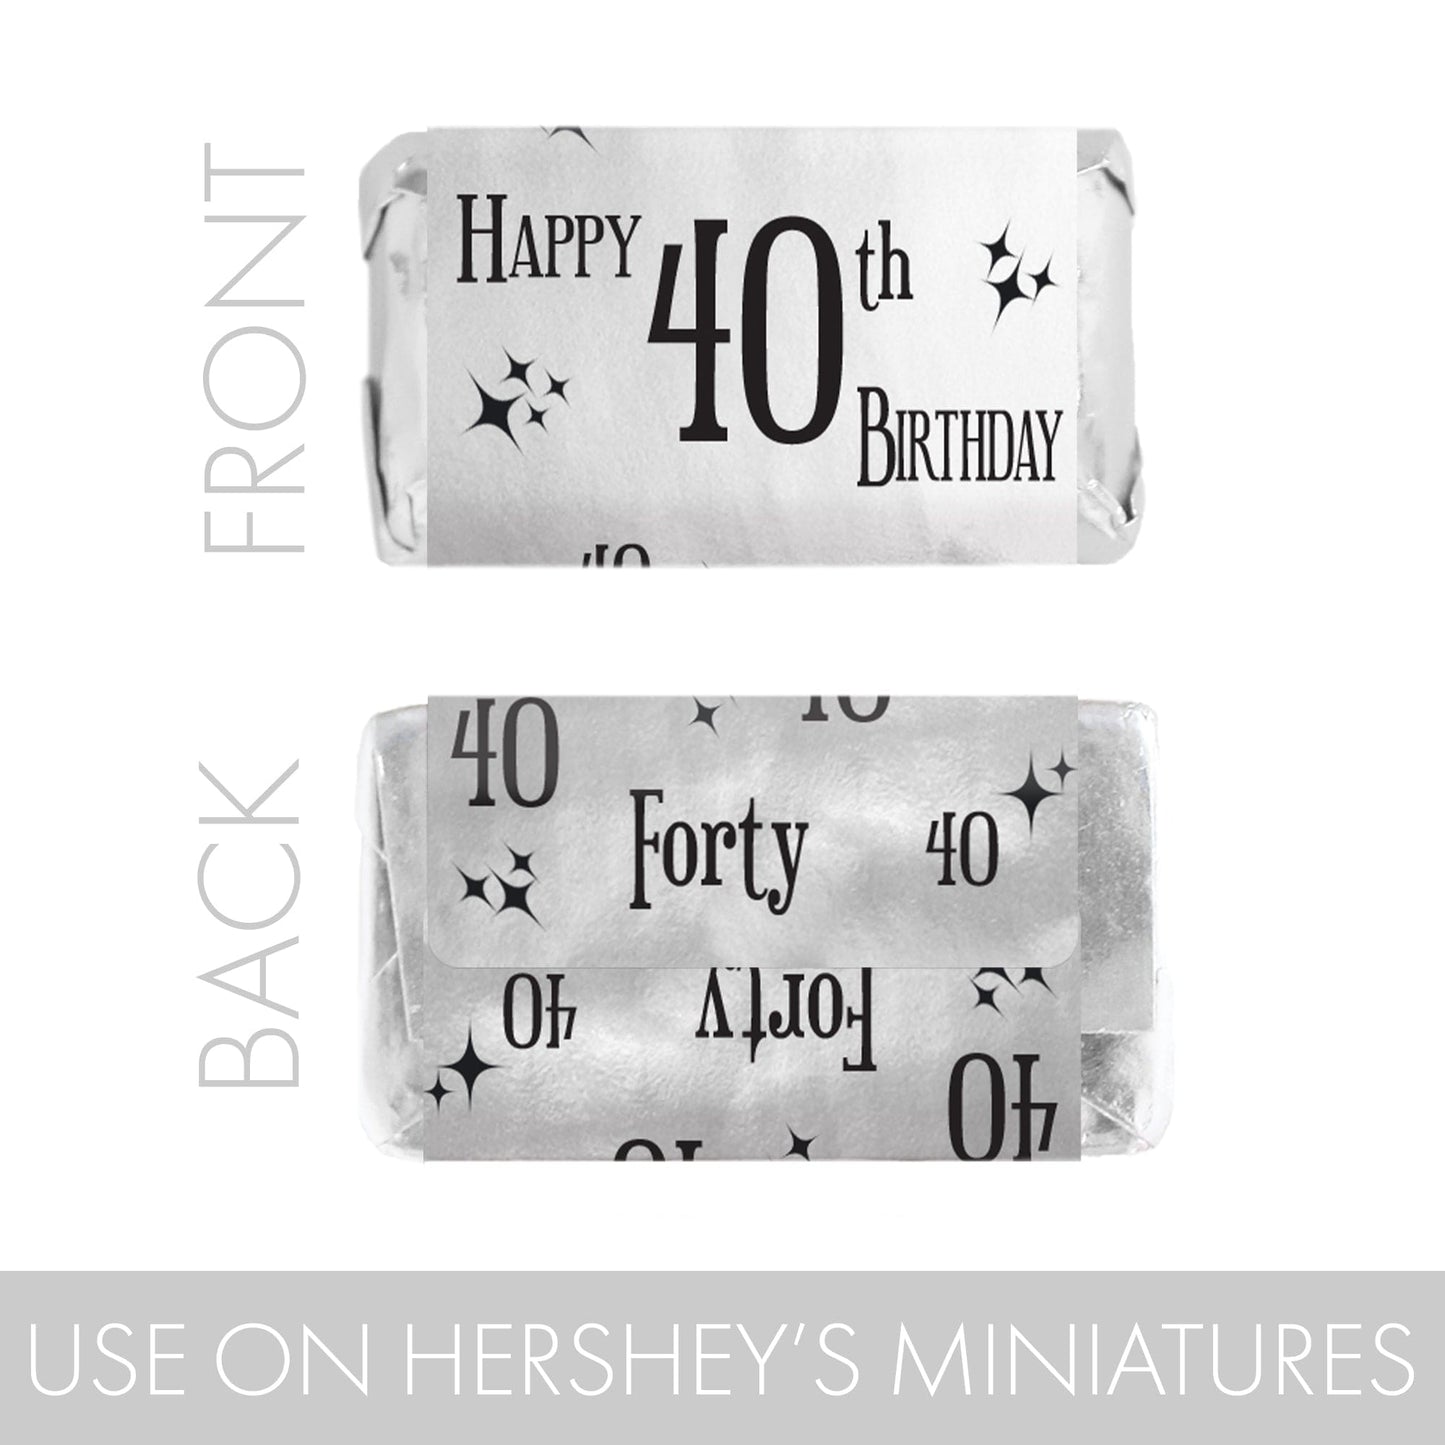 Make Your 40th Birthday Memorable with 45 Black and Silver Shiny Foil Mini Candy Bar Stickers